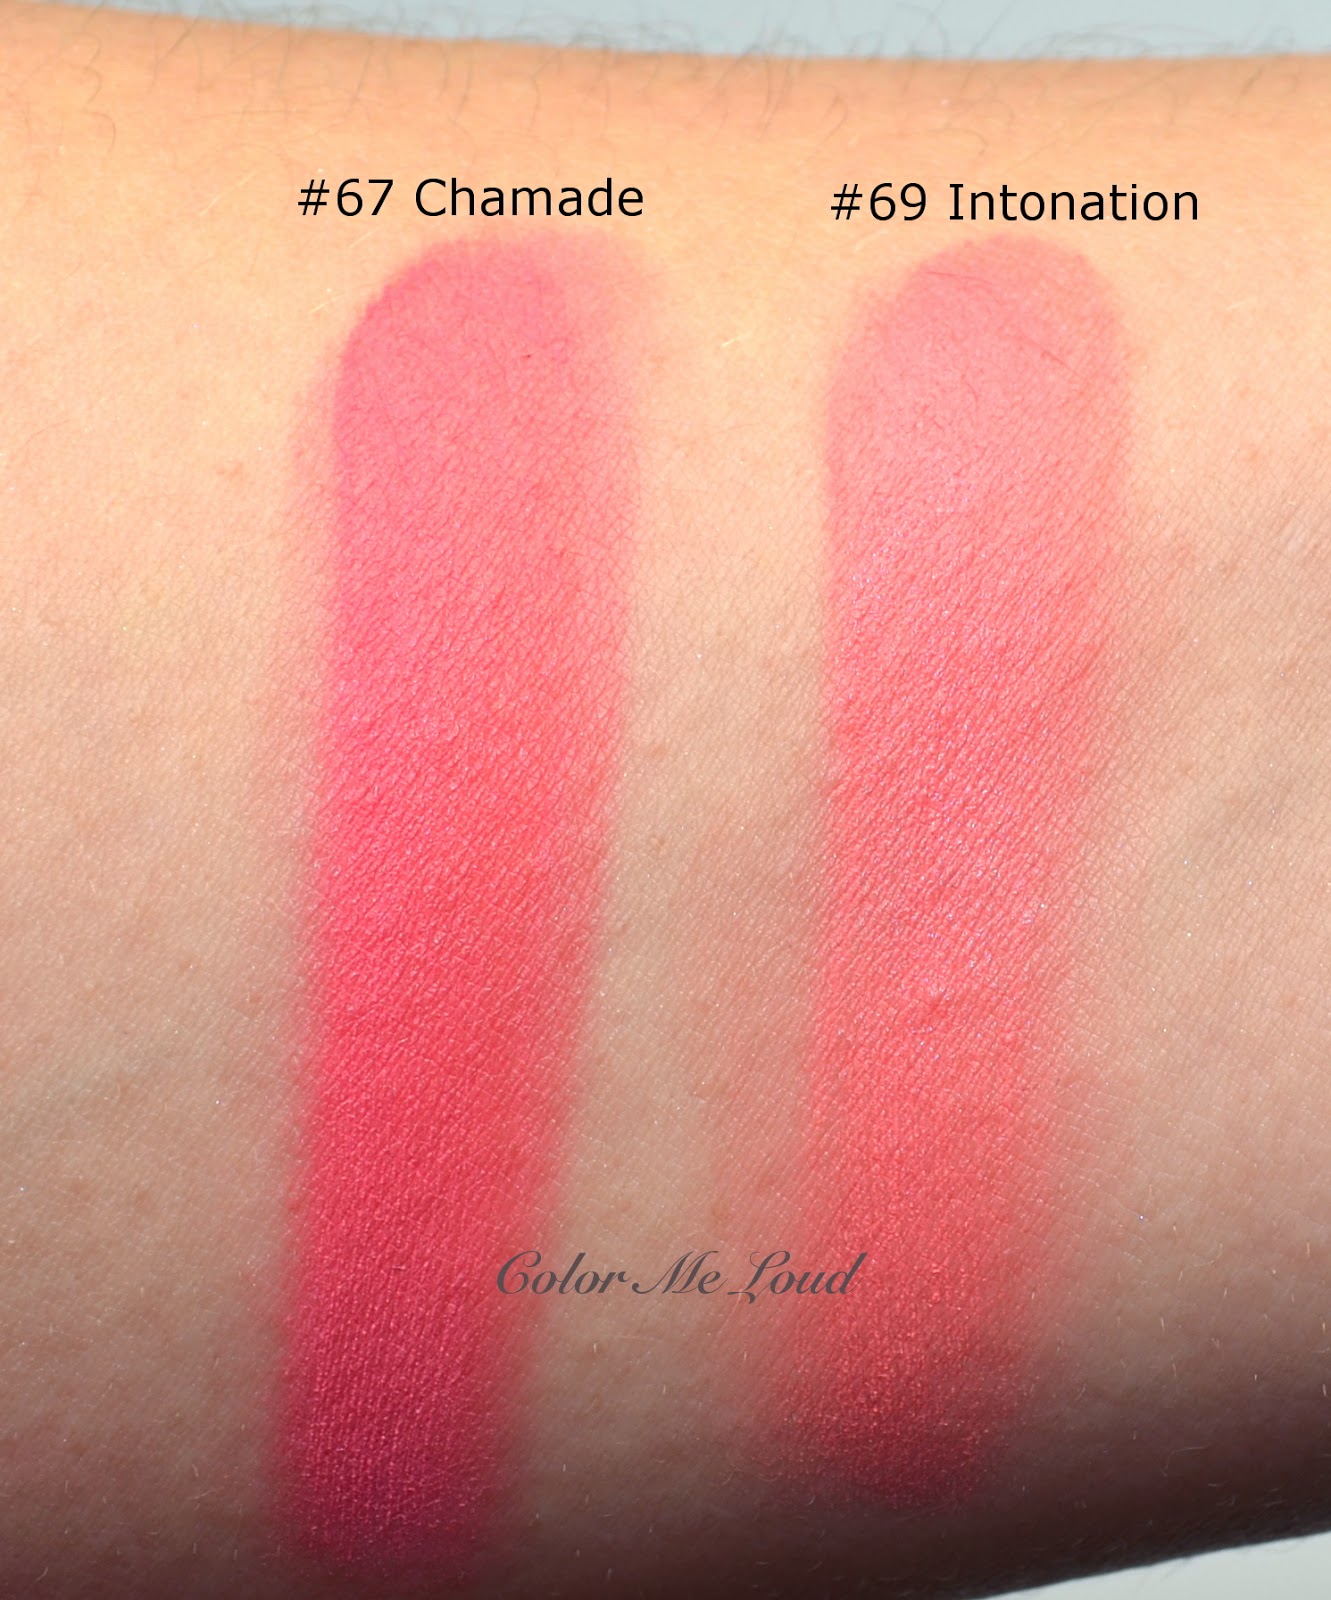 Chanel Le Blush Creme #67 Chamade & #69 Intonation from Notes du Printemps  Collection for Spring 2014